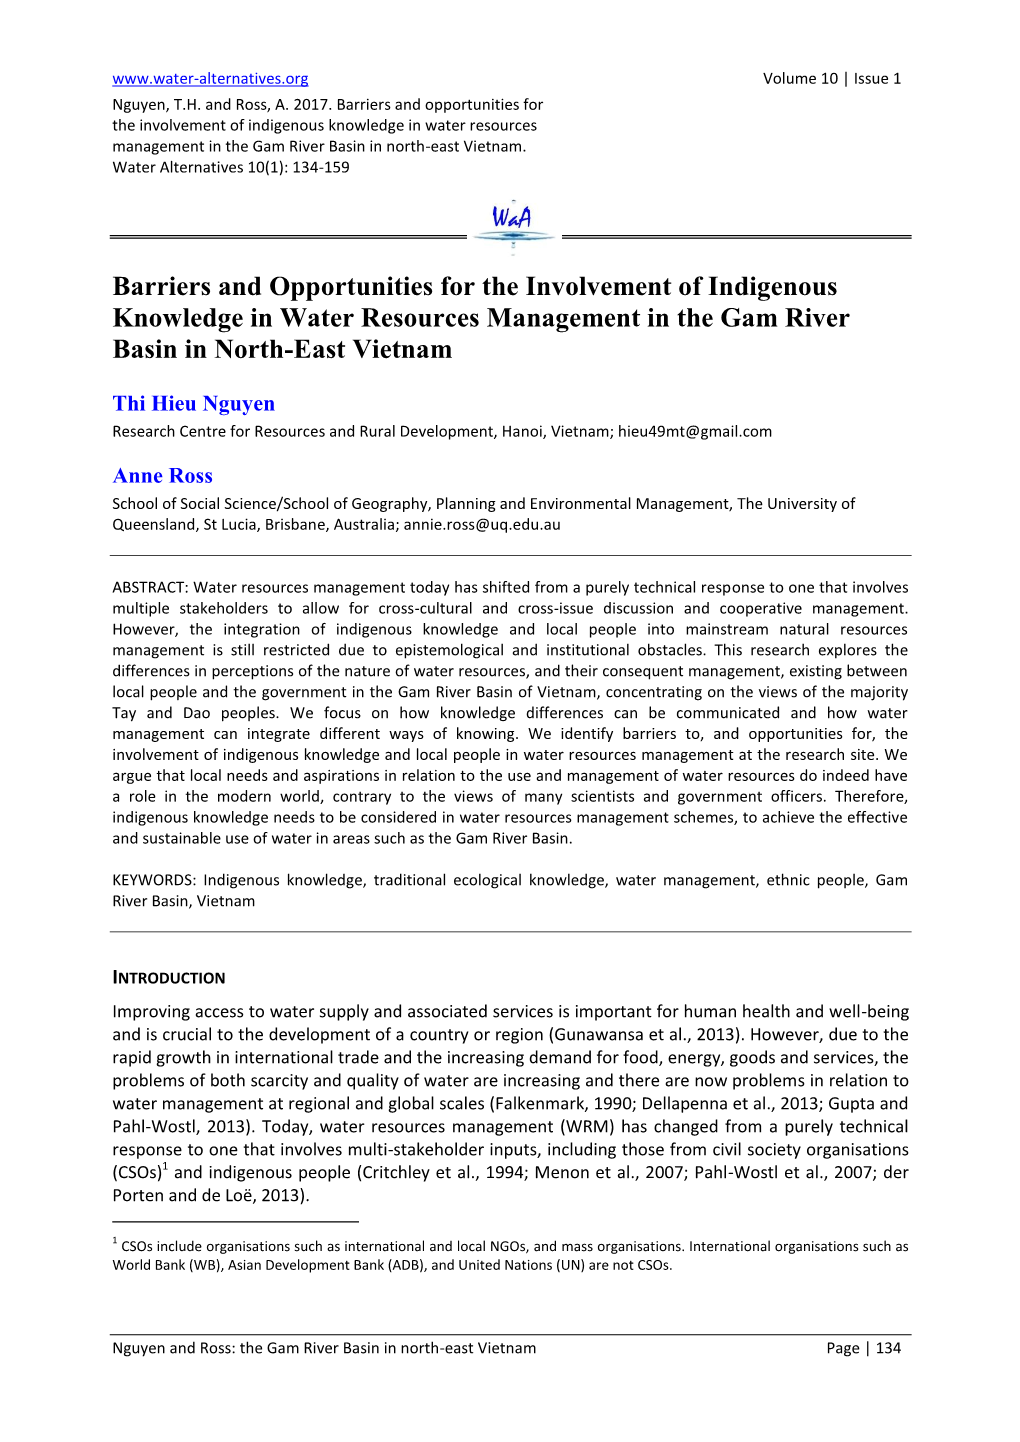 Barriers and Opportunities for the Involvement of Indigenous Knowledge in Water Resources Management in the Gam River Basin in North-East Vietnam